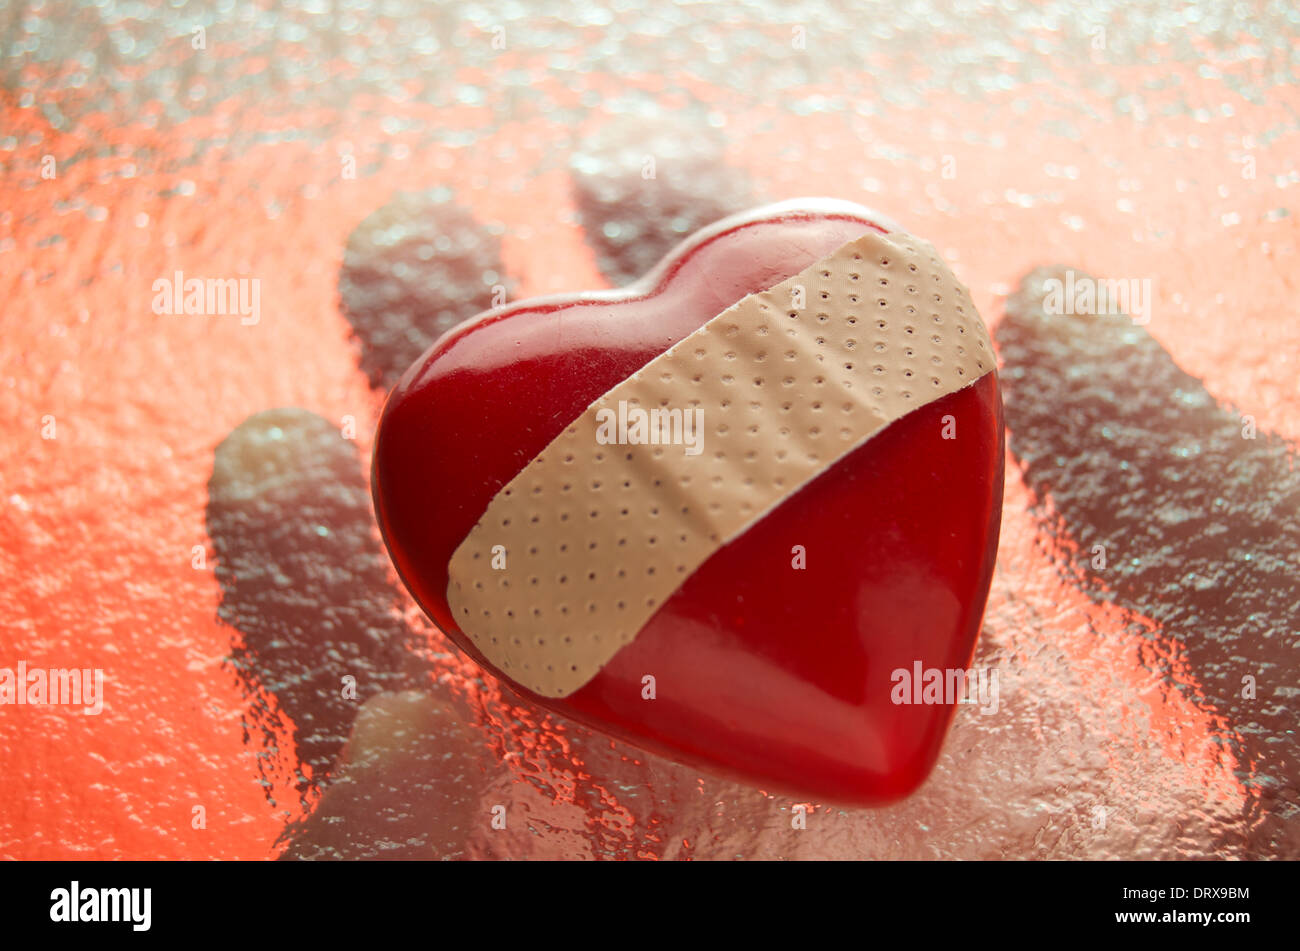 Heart with band aid being held by hand under glass. Stock Photo